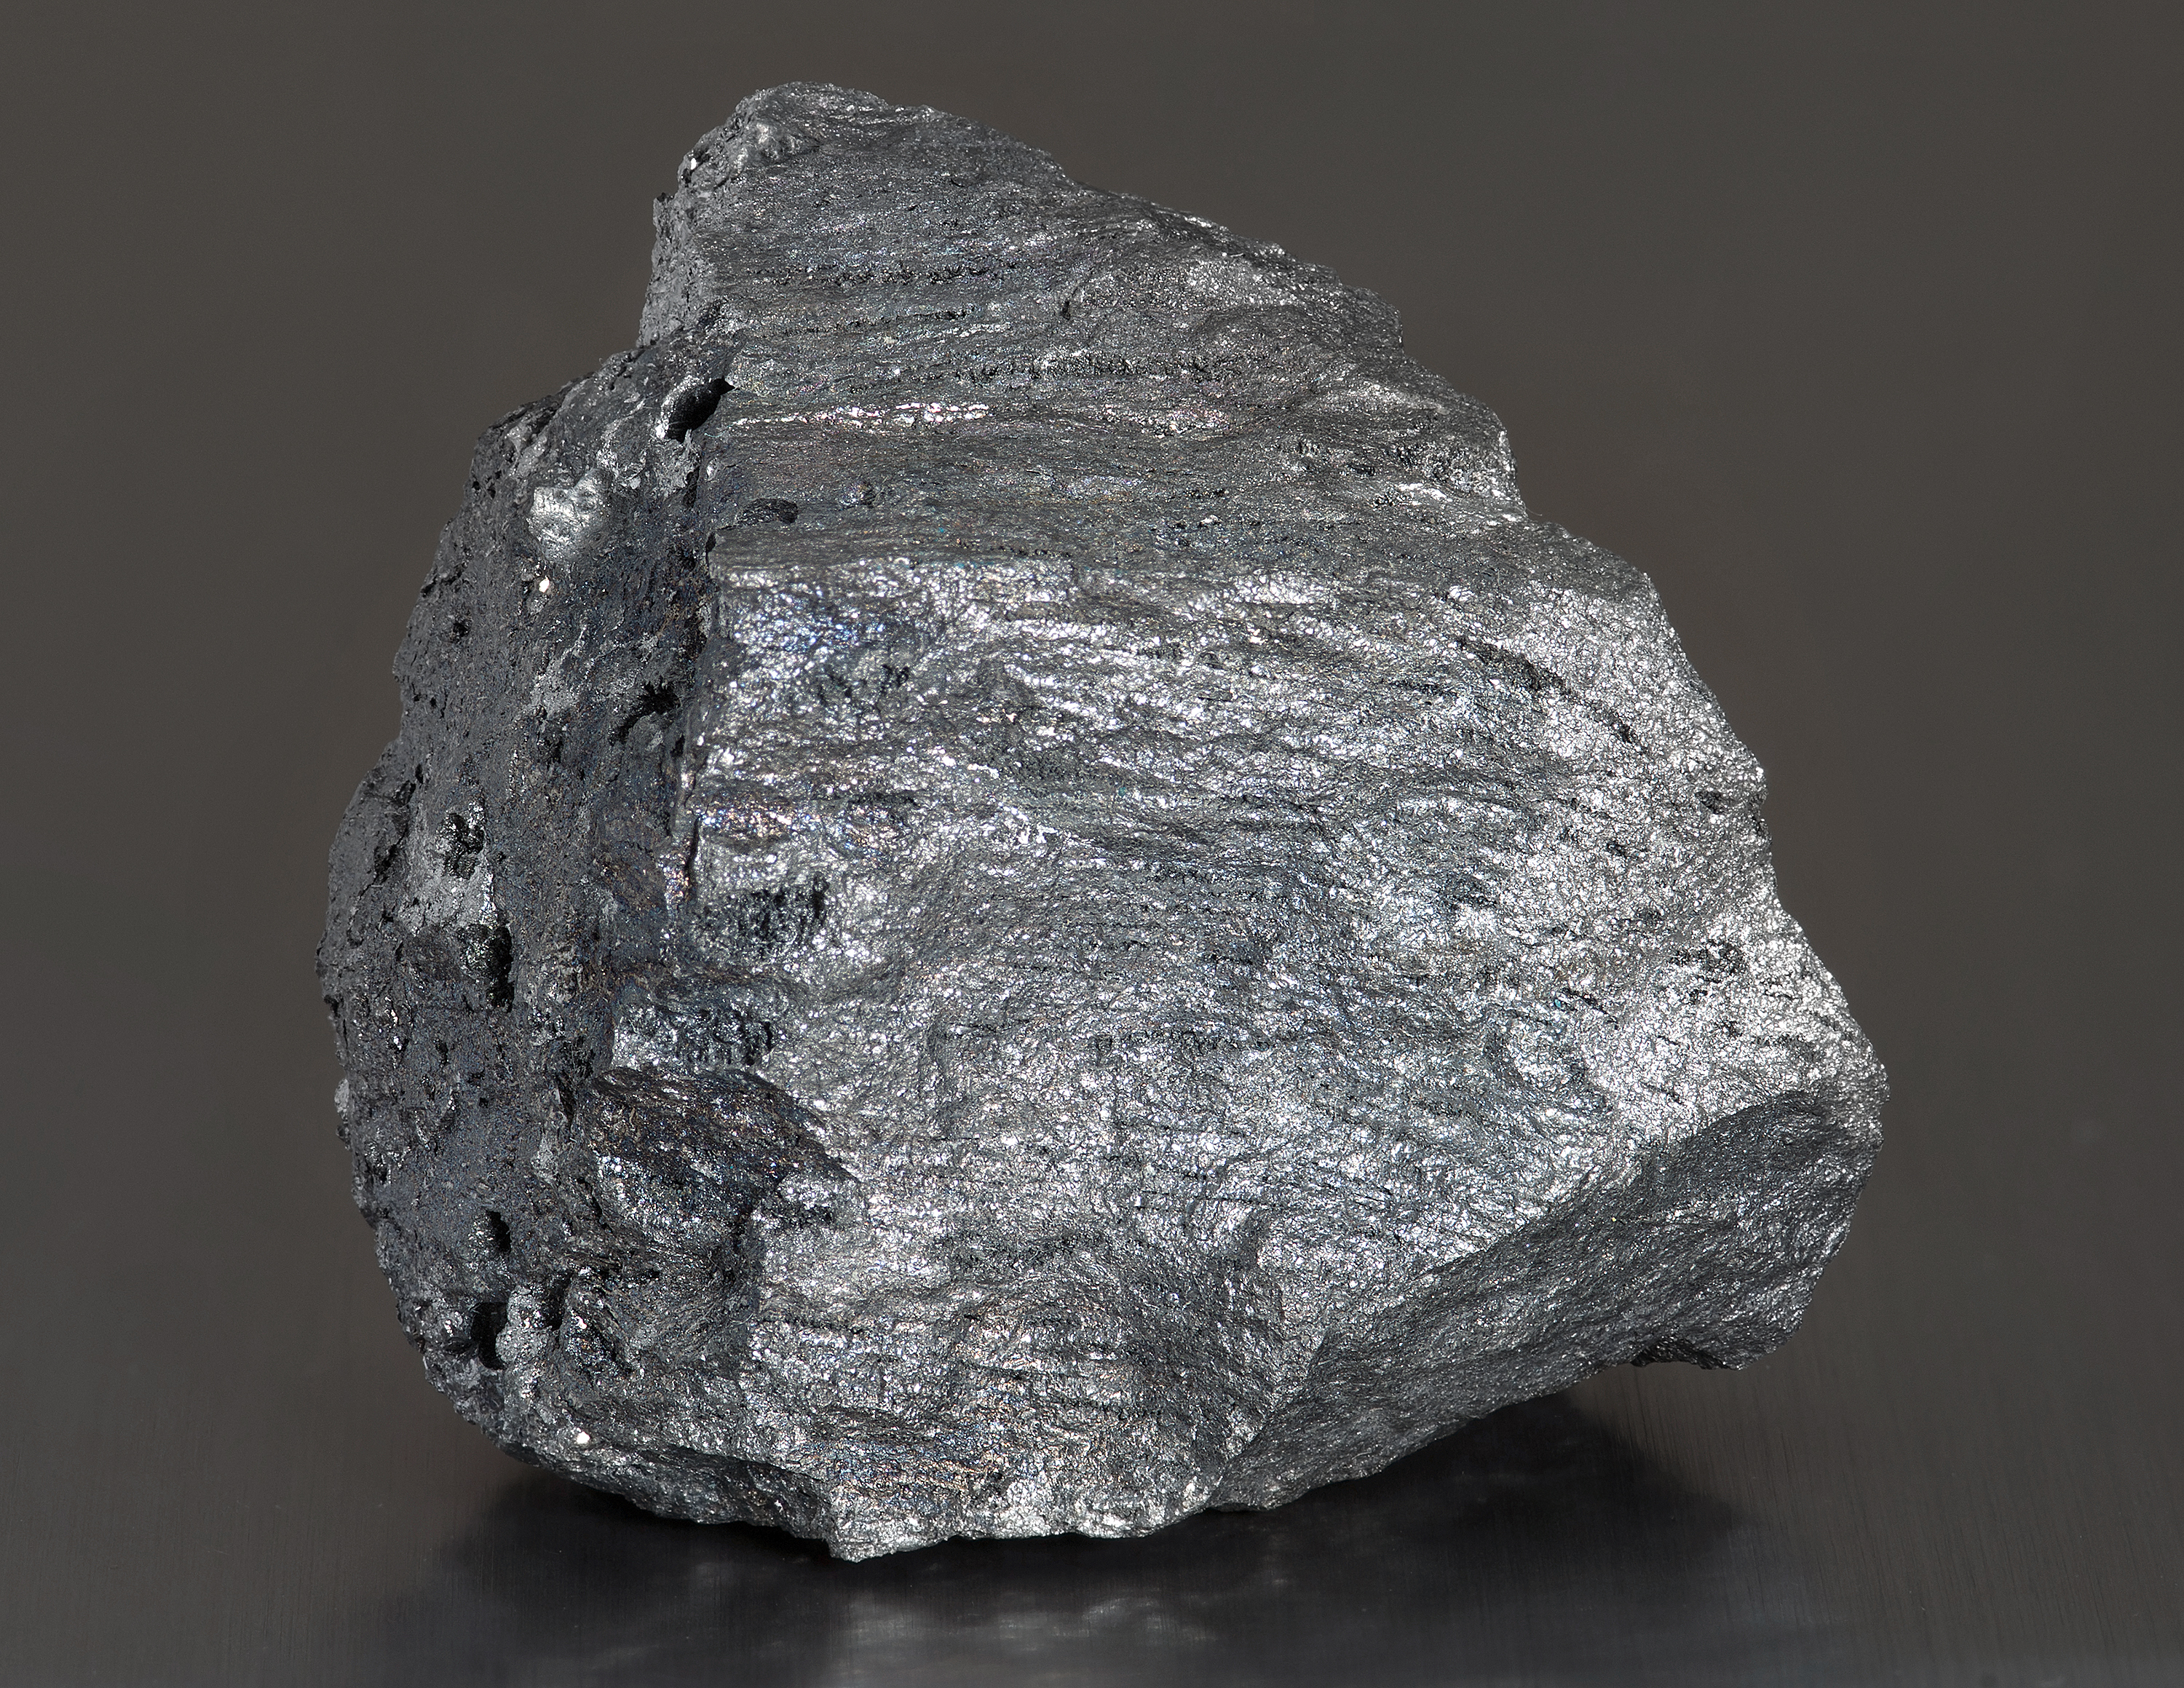 Iron occurs in nature in mineral form because it is unstable and reactive in its elemental form.